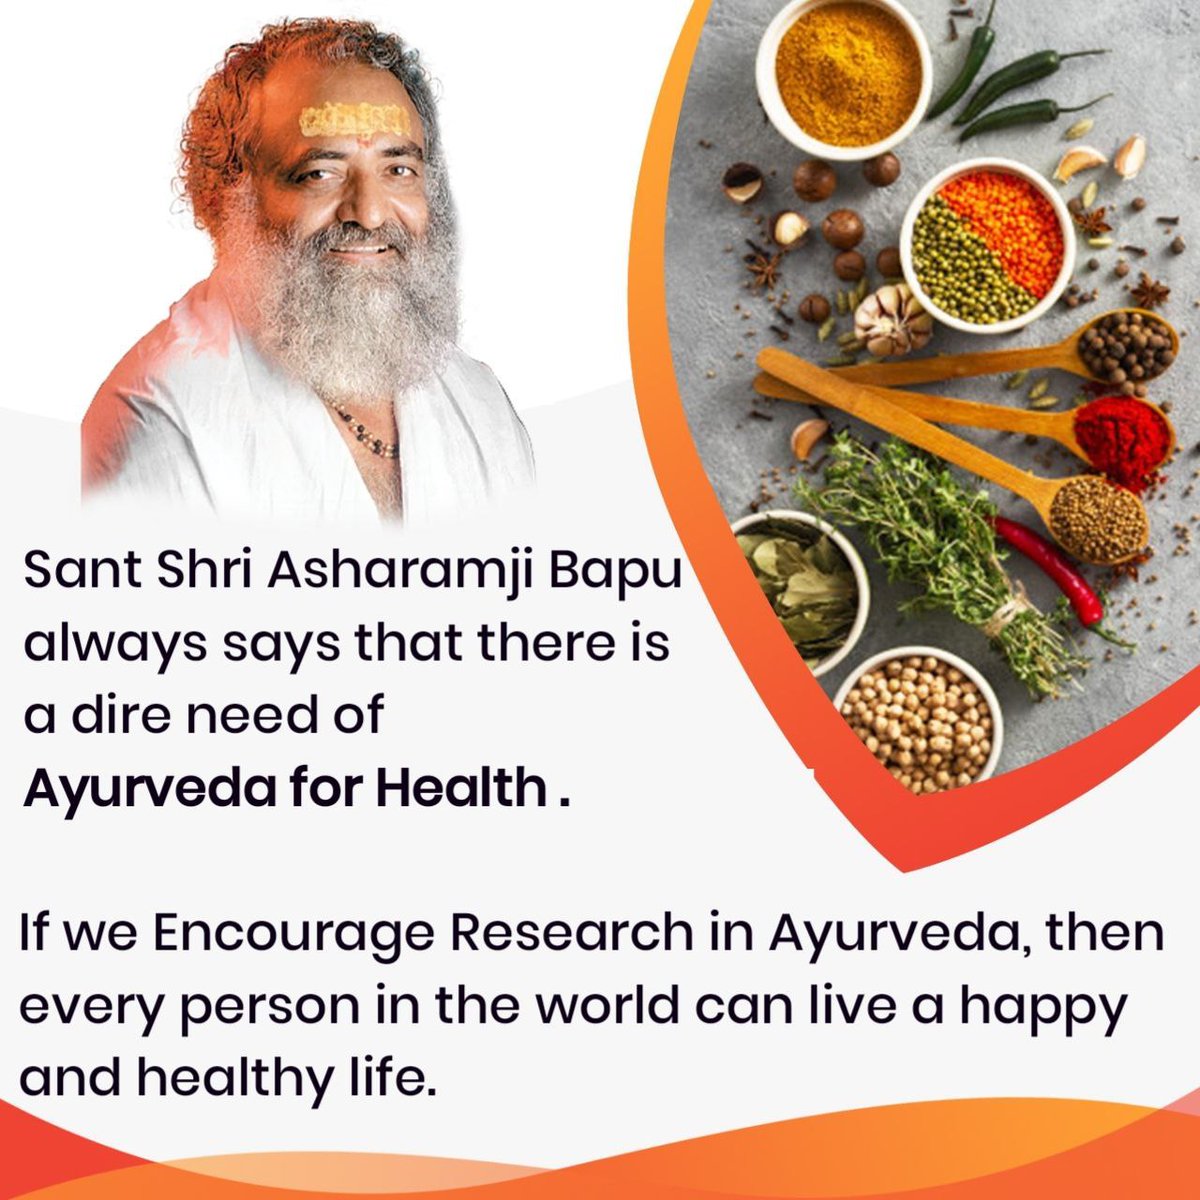 Sant Shri Asharamji Bapu 
Wellness Journey 
Healthy Living 
#आयुर्वेदामृत
Bapuji says Ayurveda is the base of health Several diseases are cured by Ayurveda treatment Tulsi is the main herbal medicine which is curable on all diseases